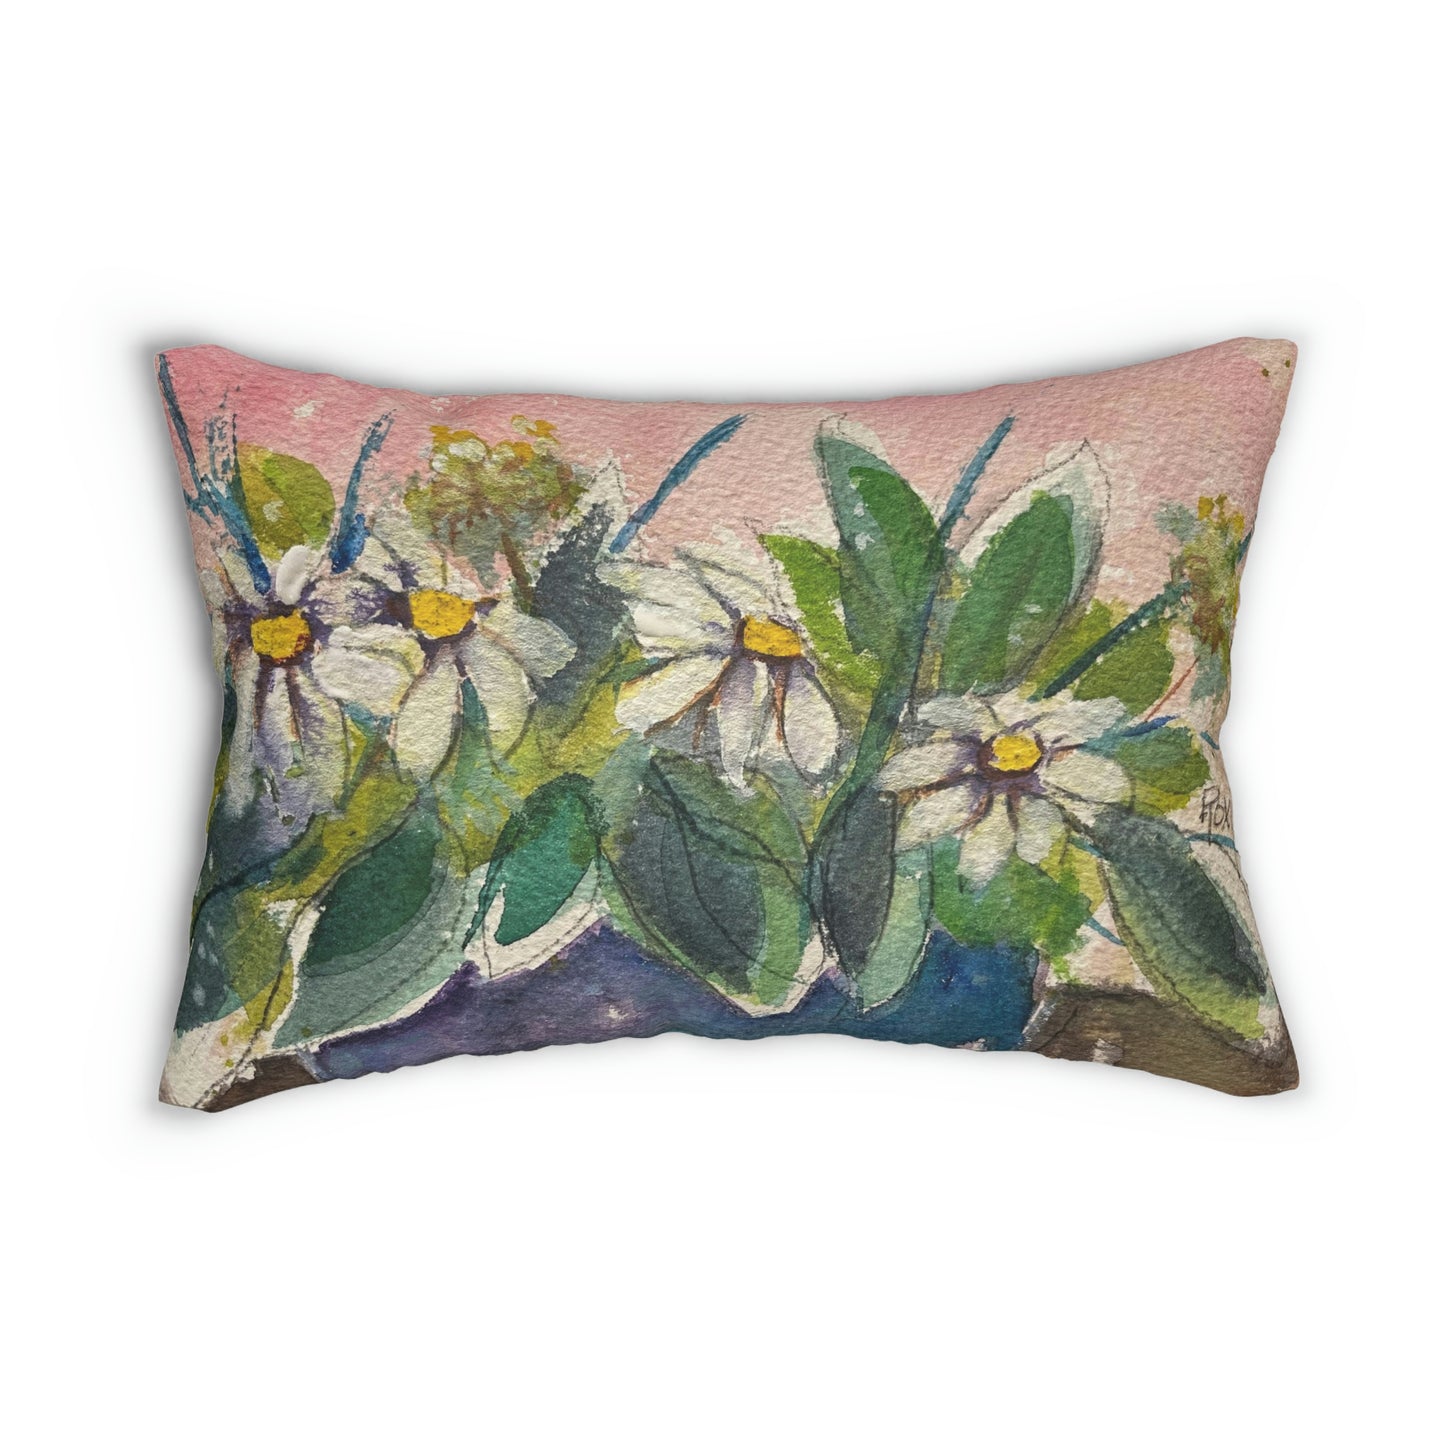 Daisies on the Table Lumbar Pillow Printed on both Sides